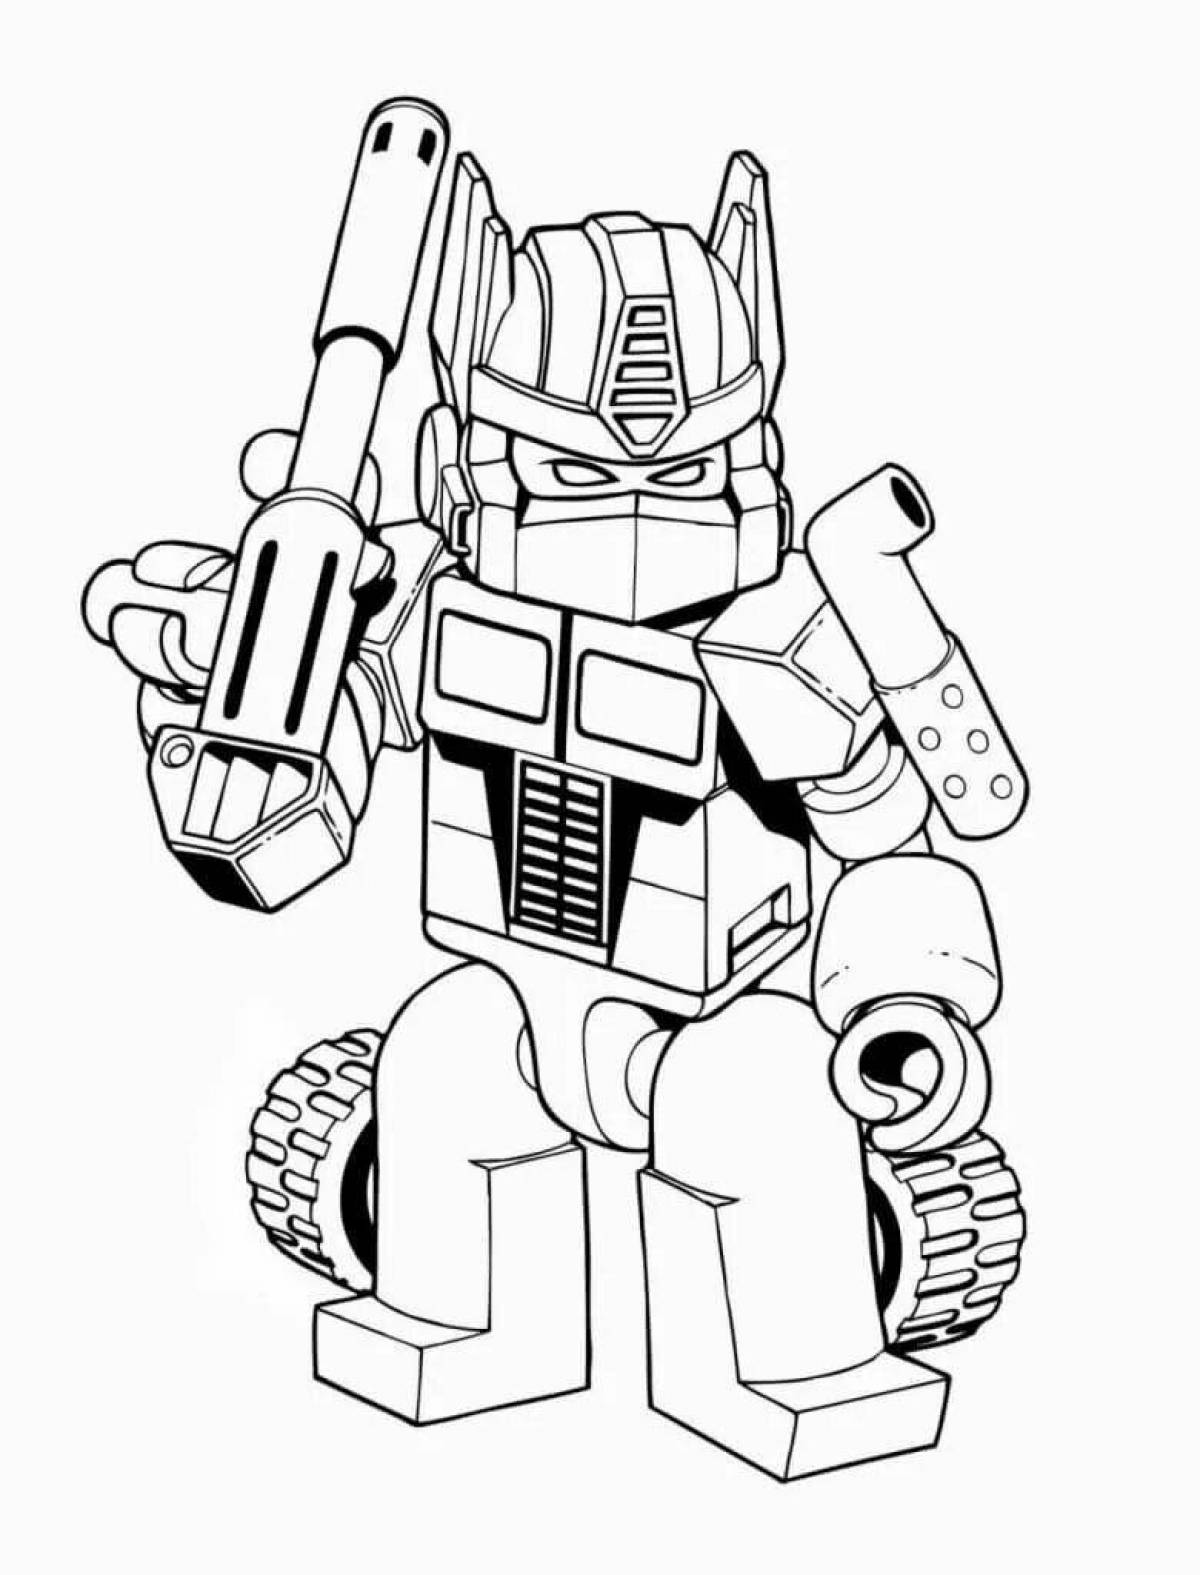 Exalted autobot optimus prime coloring page